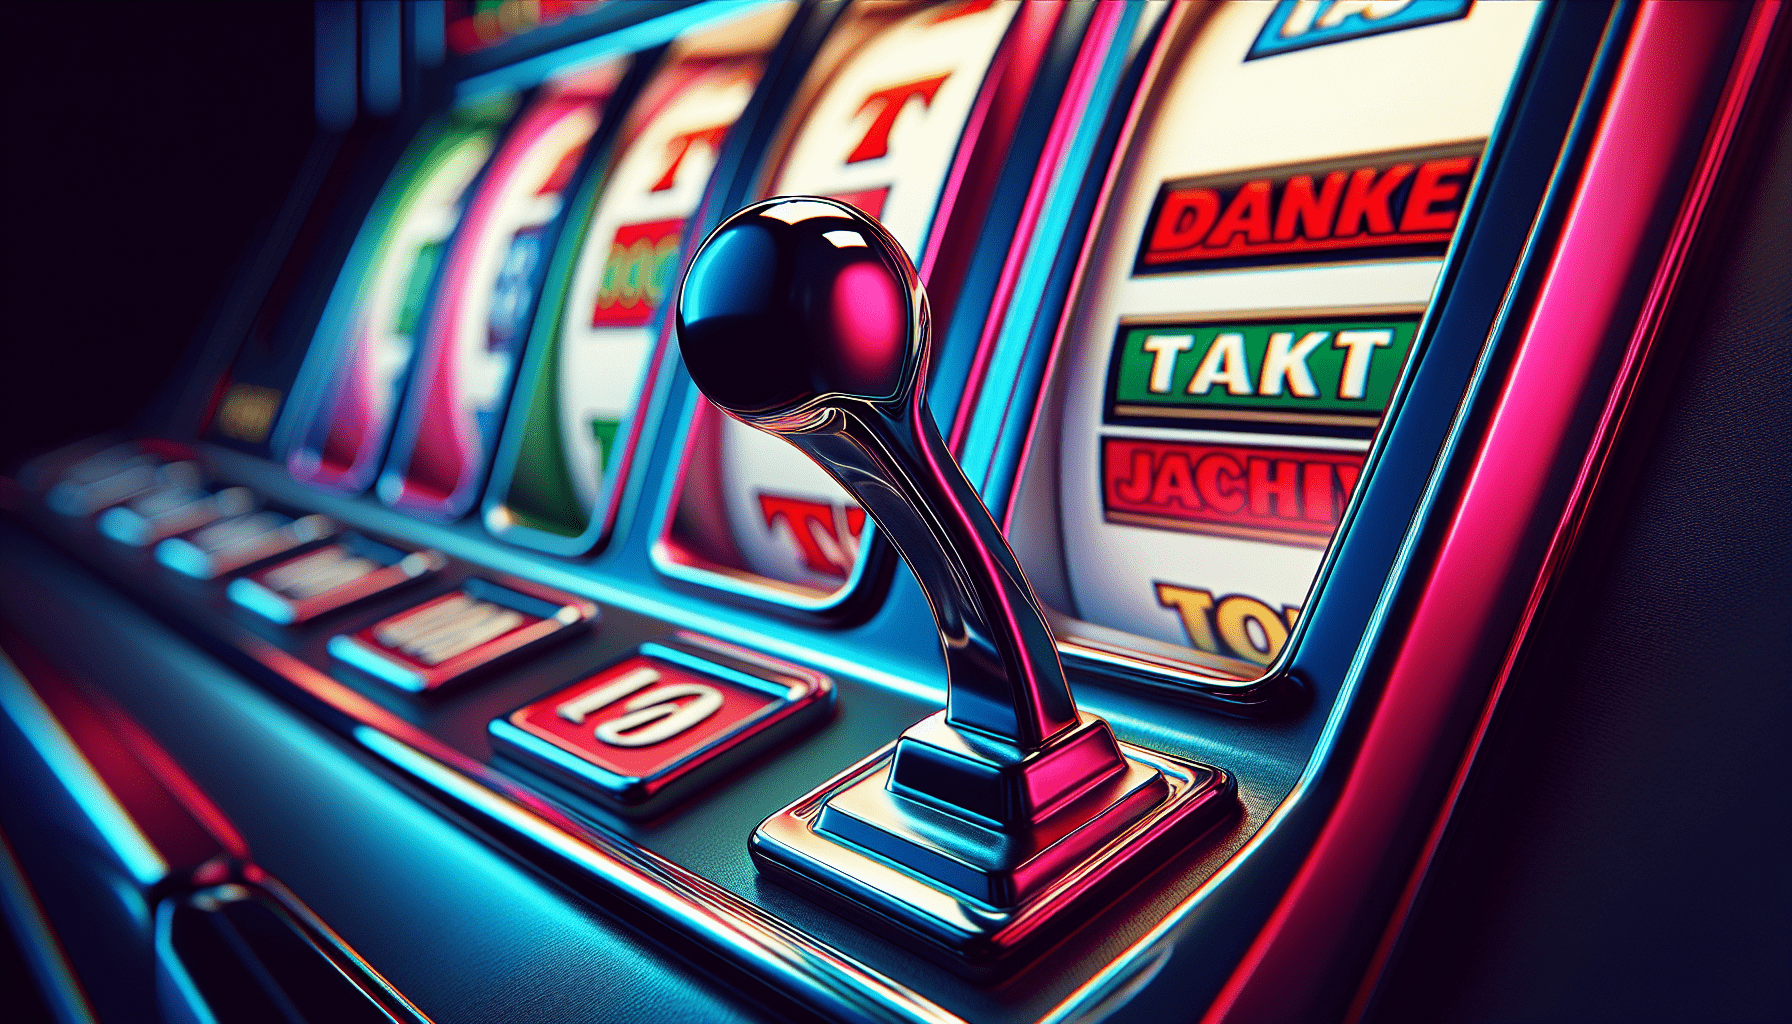 How Do You Pick A Good Slot Machine At The Casino?